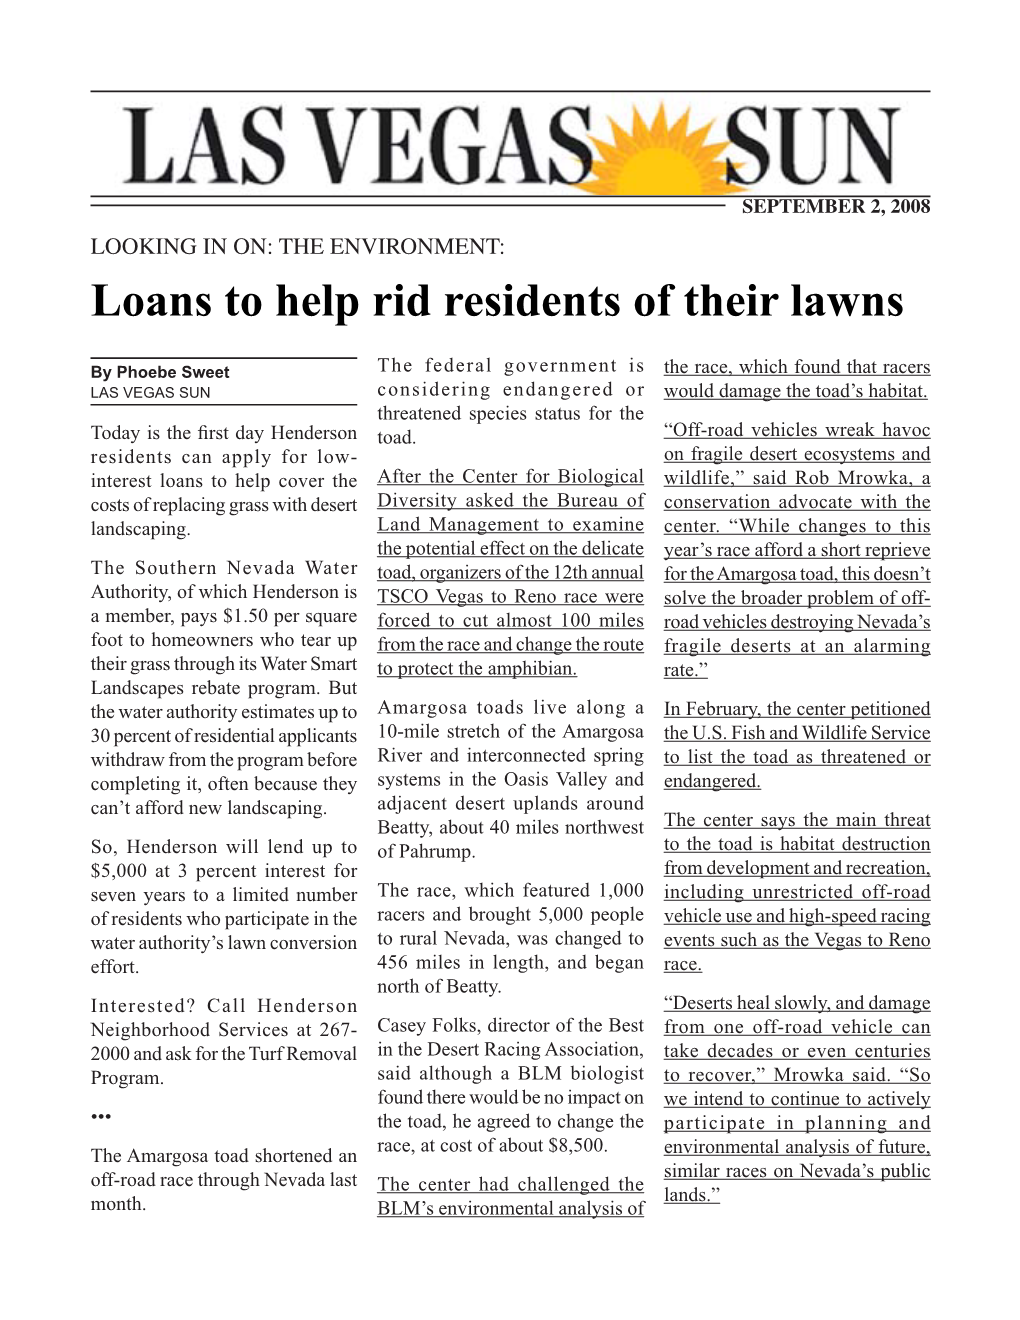 Loans to Help Rid Residents of Their Lawns